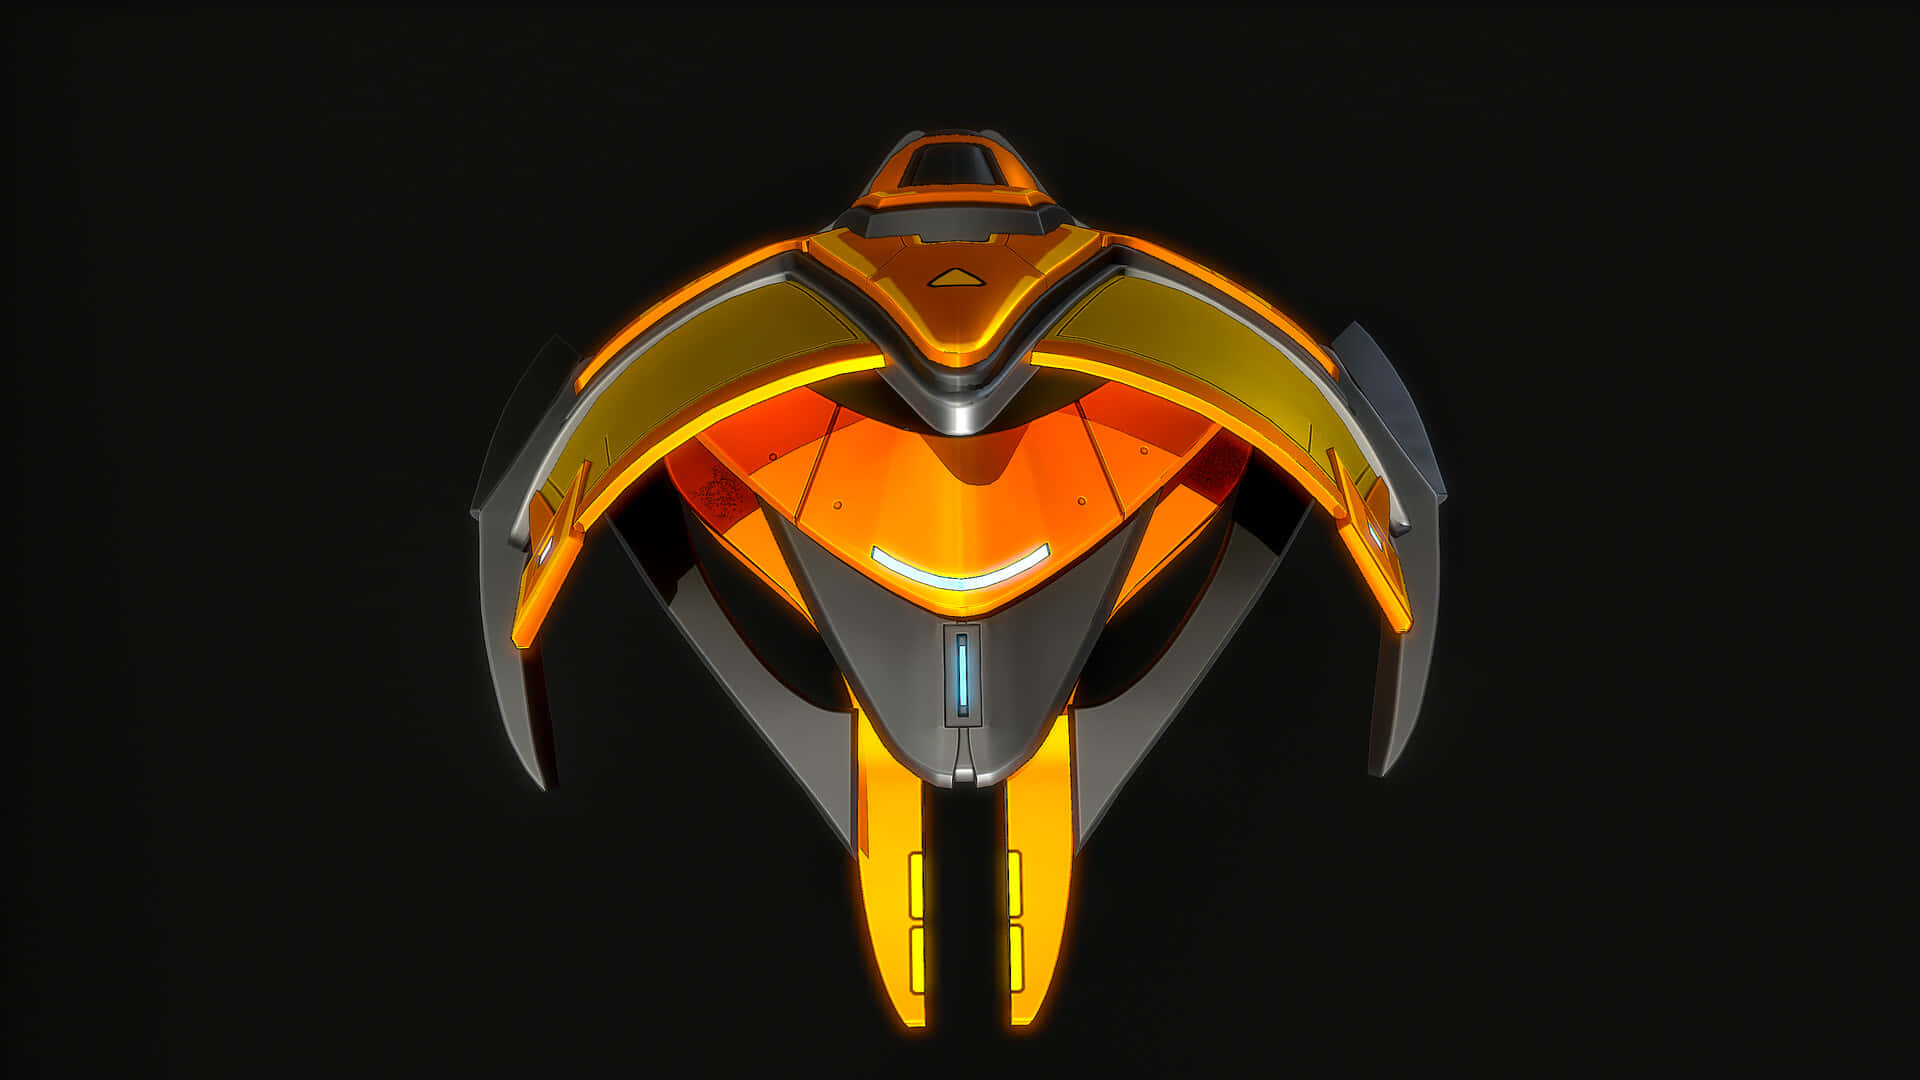 A Futuristic Looking Helmet With Orange And Black Stripes